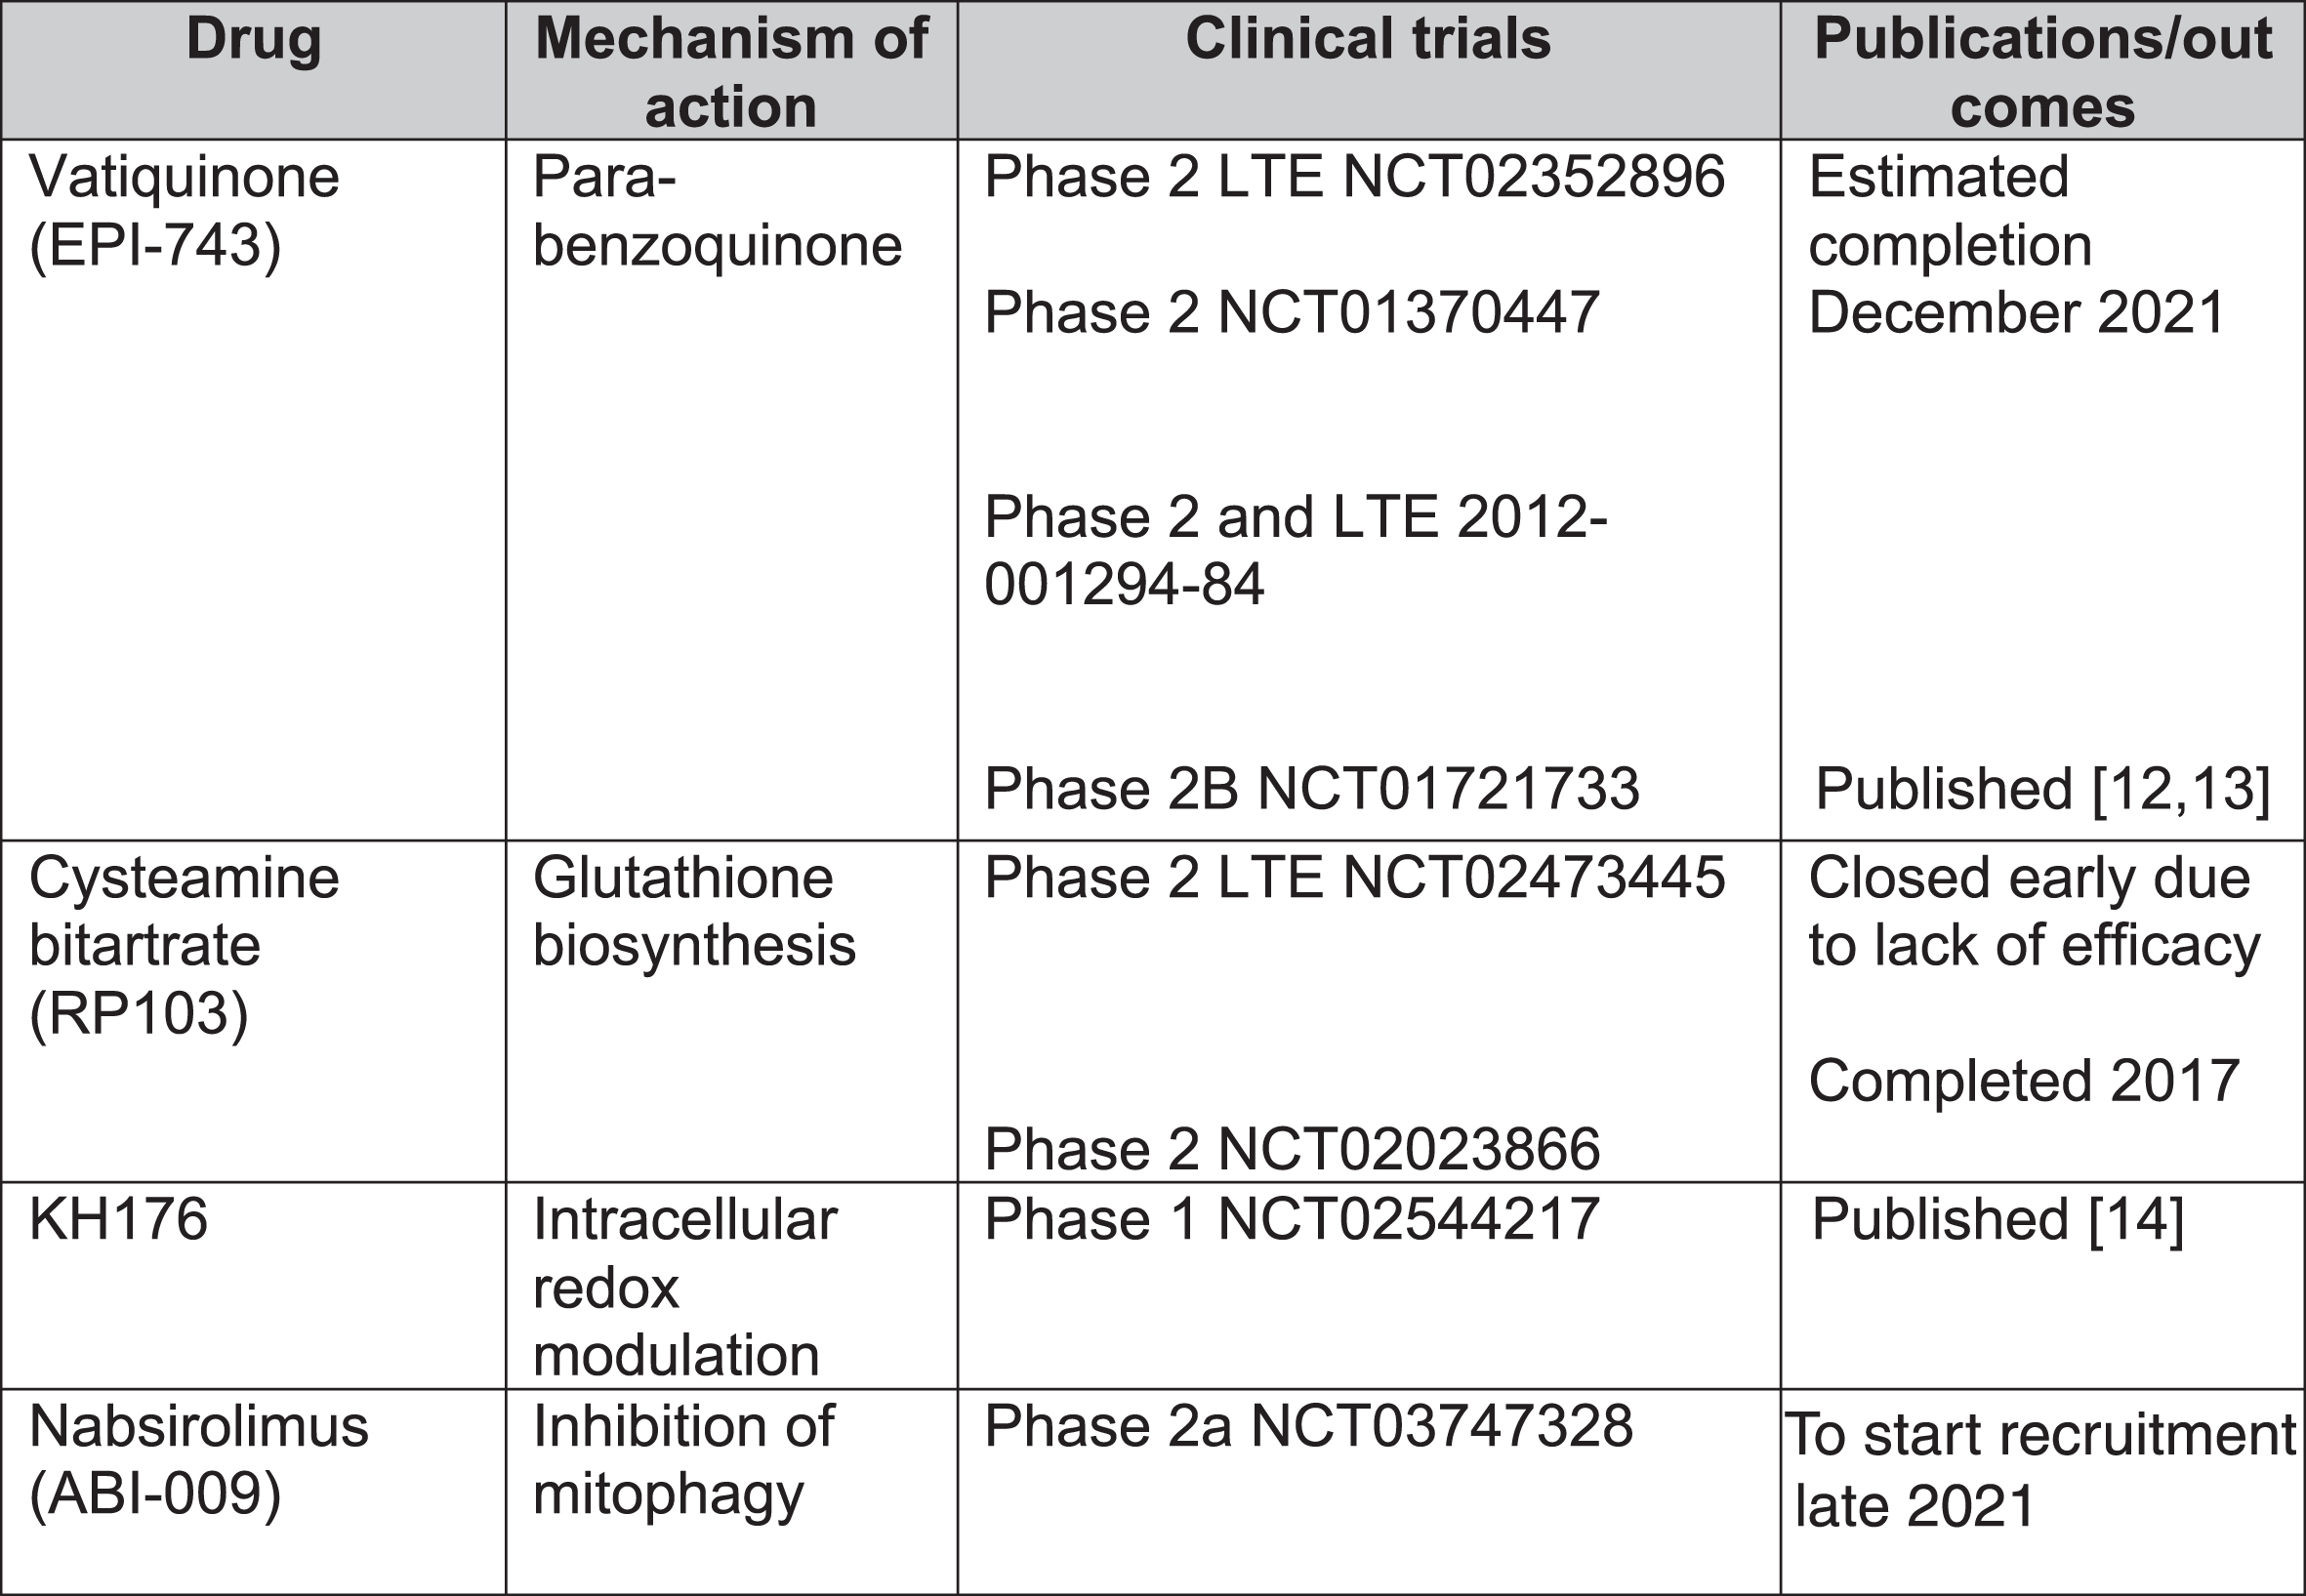 Clinical trials for treatment of Leigh syndrome. LTE = long-term extension.